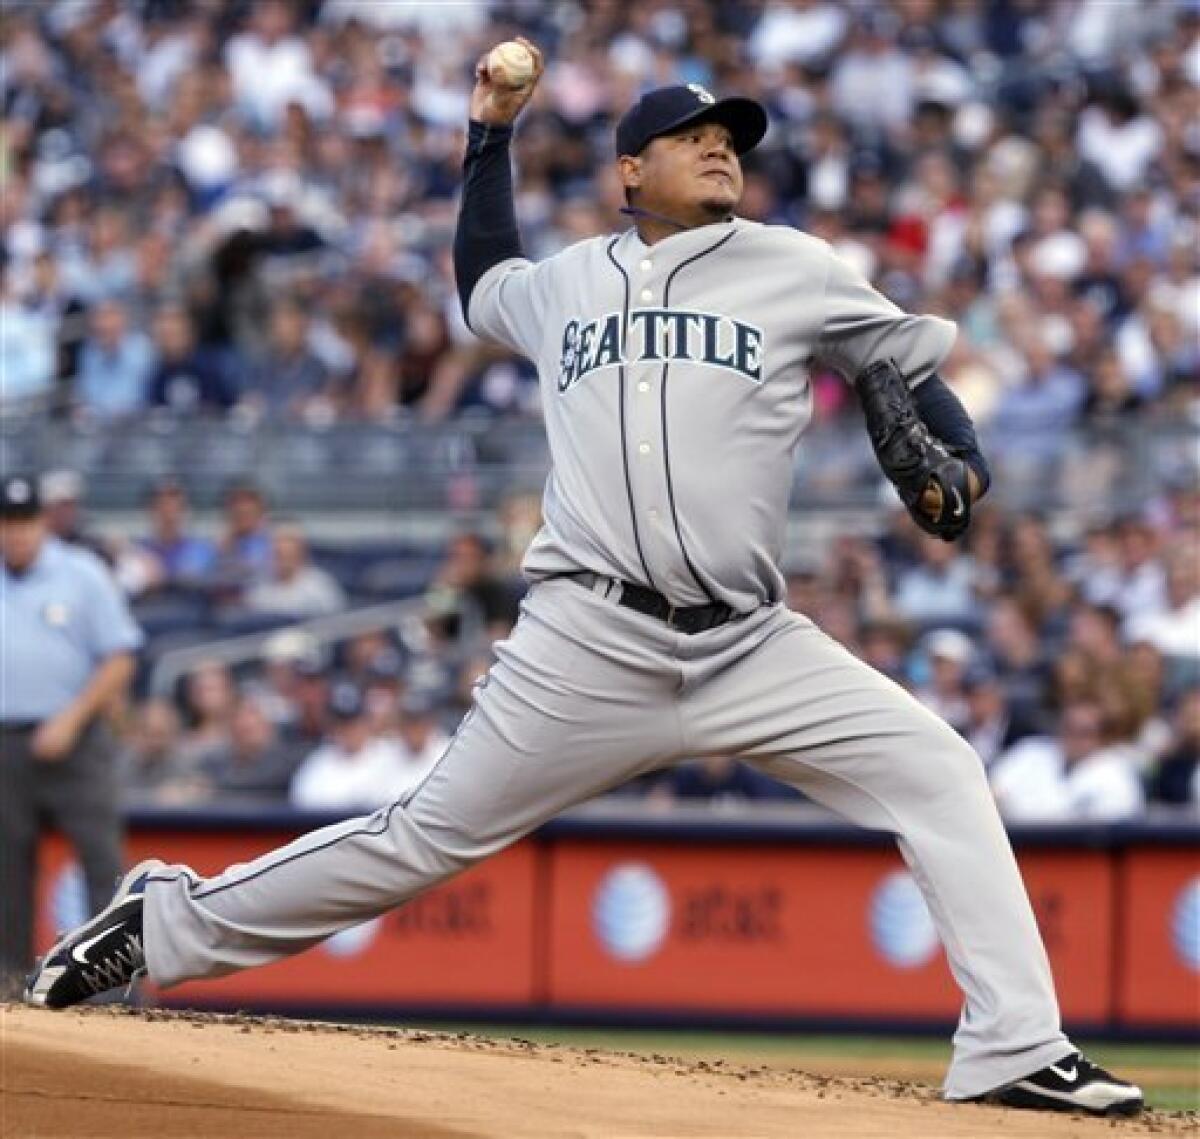 King Felix! Seattle ace Hernandez wins AL Cy Young - The San Diego